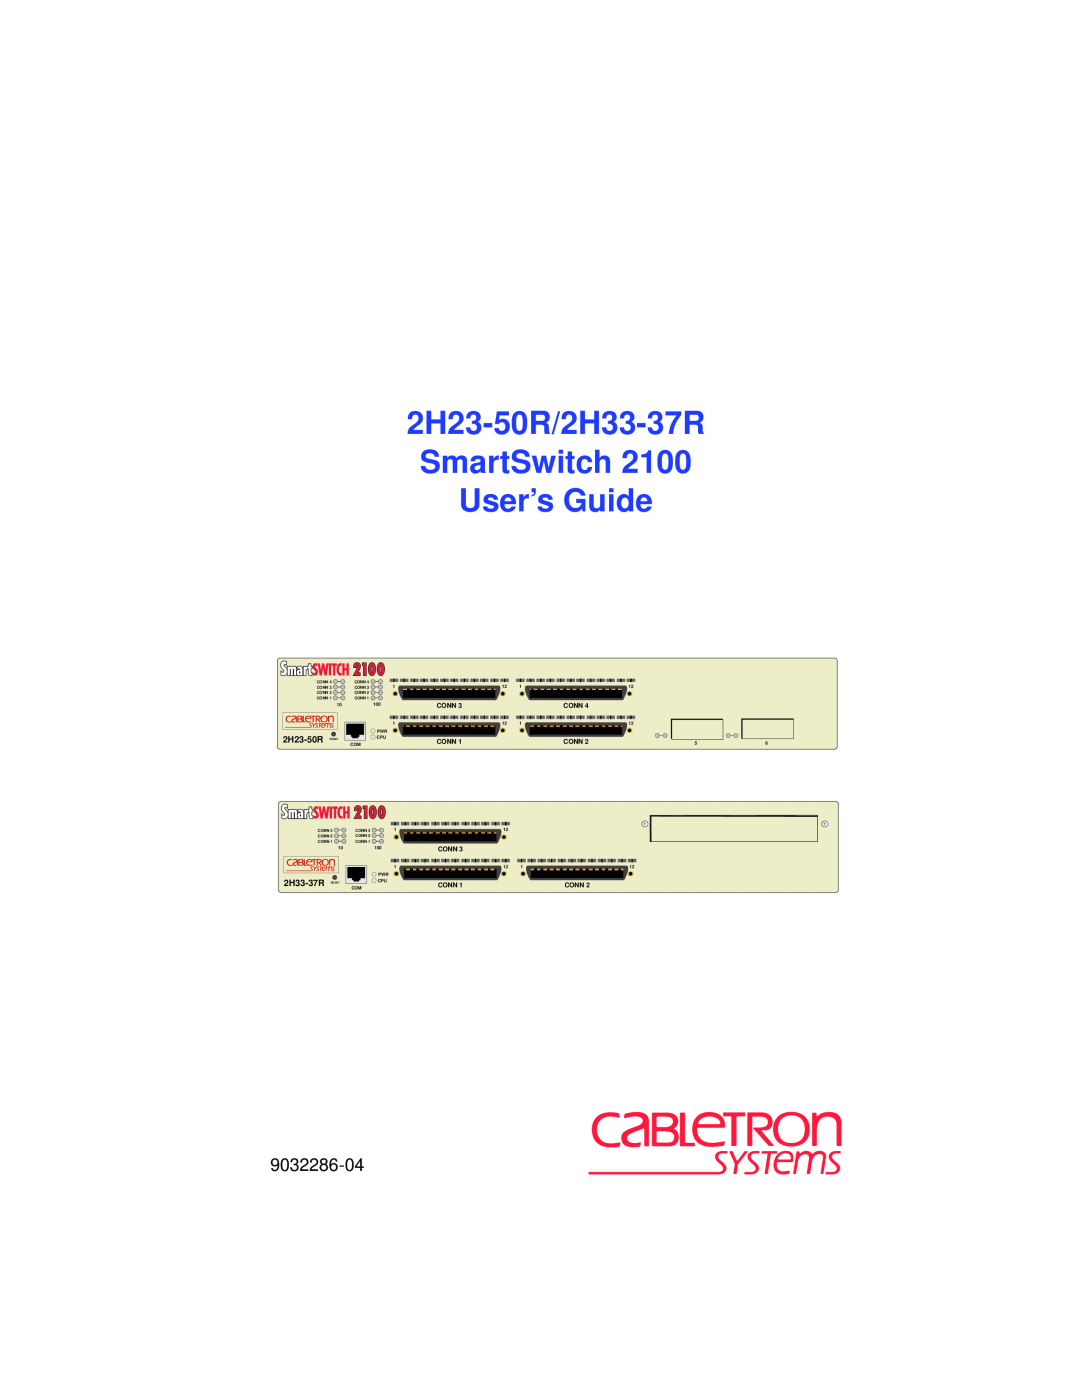 Cabletron Systems manual 2H23-50R/2H33-37R SmartSwitch 2100 User’s Guide, 9032286-04, Conn Conn Conn Conn 